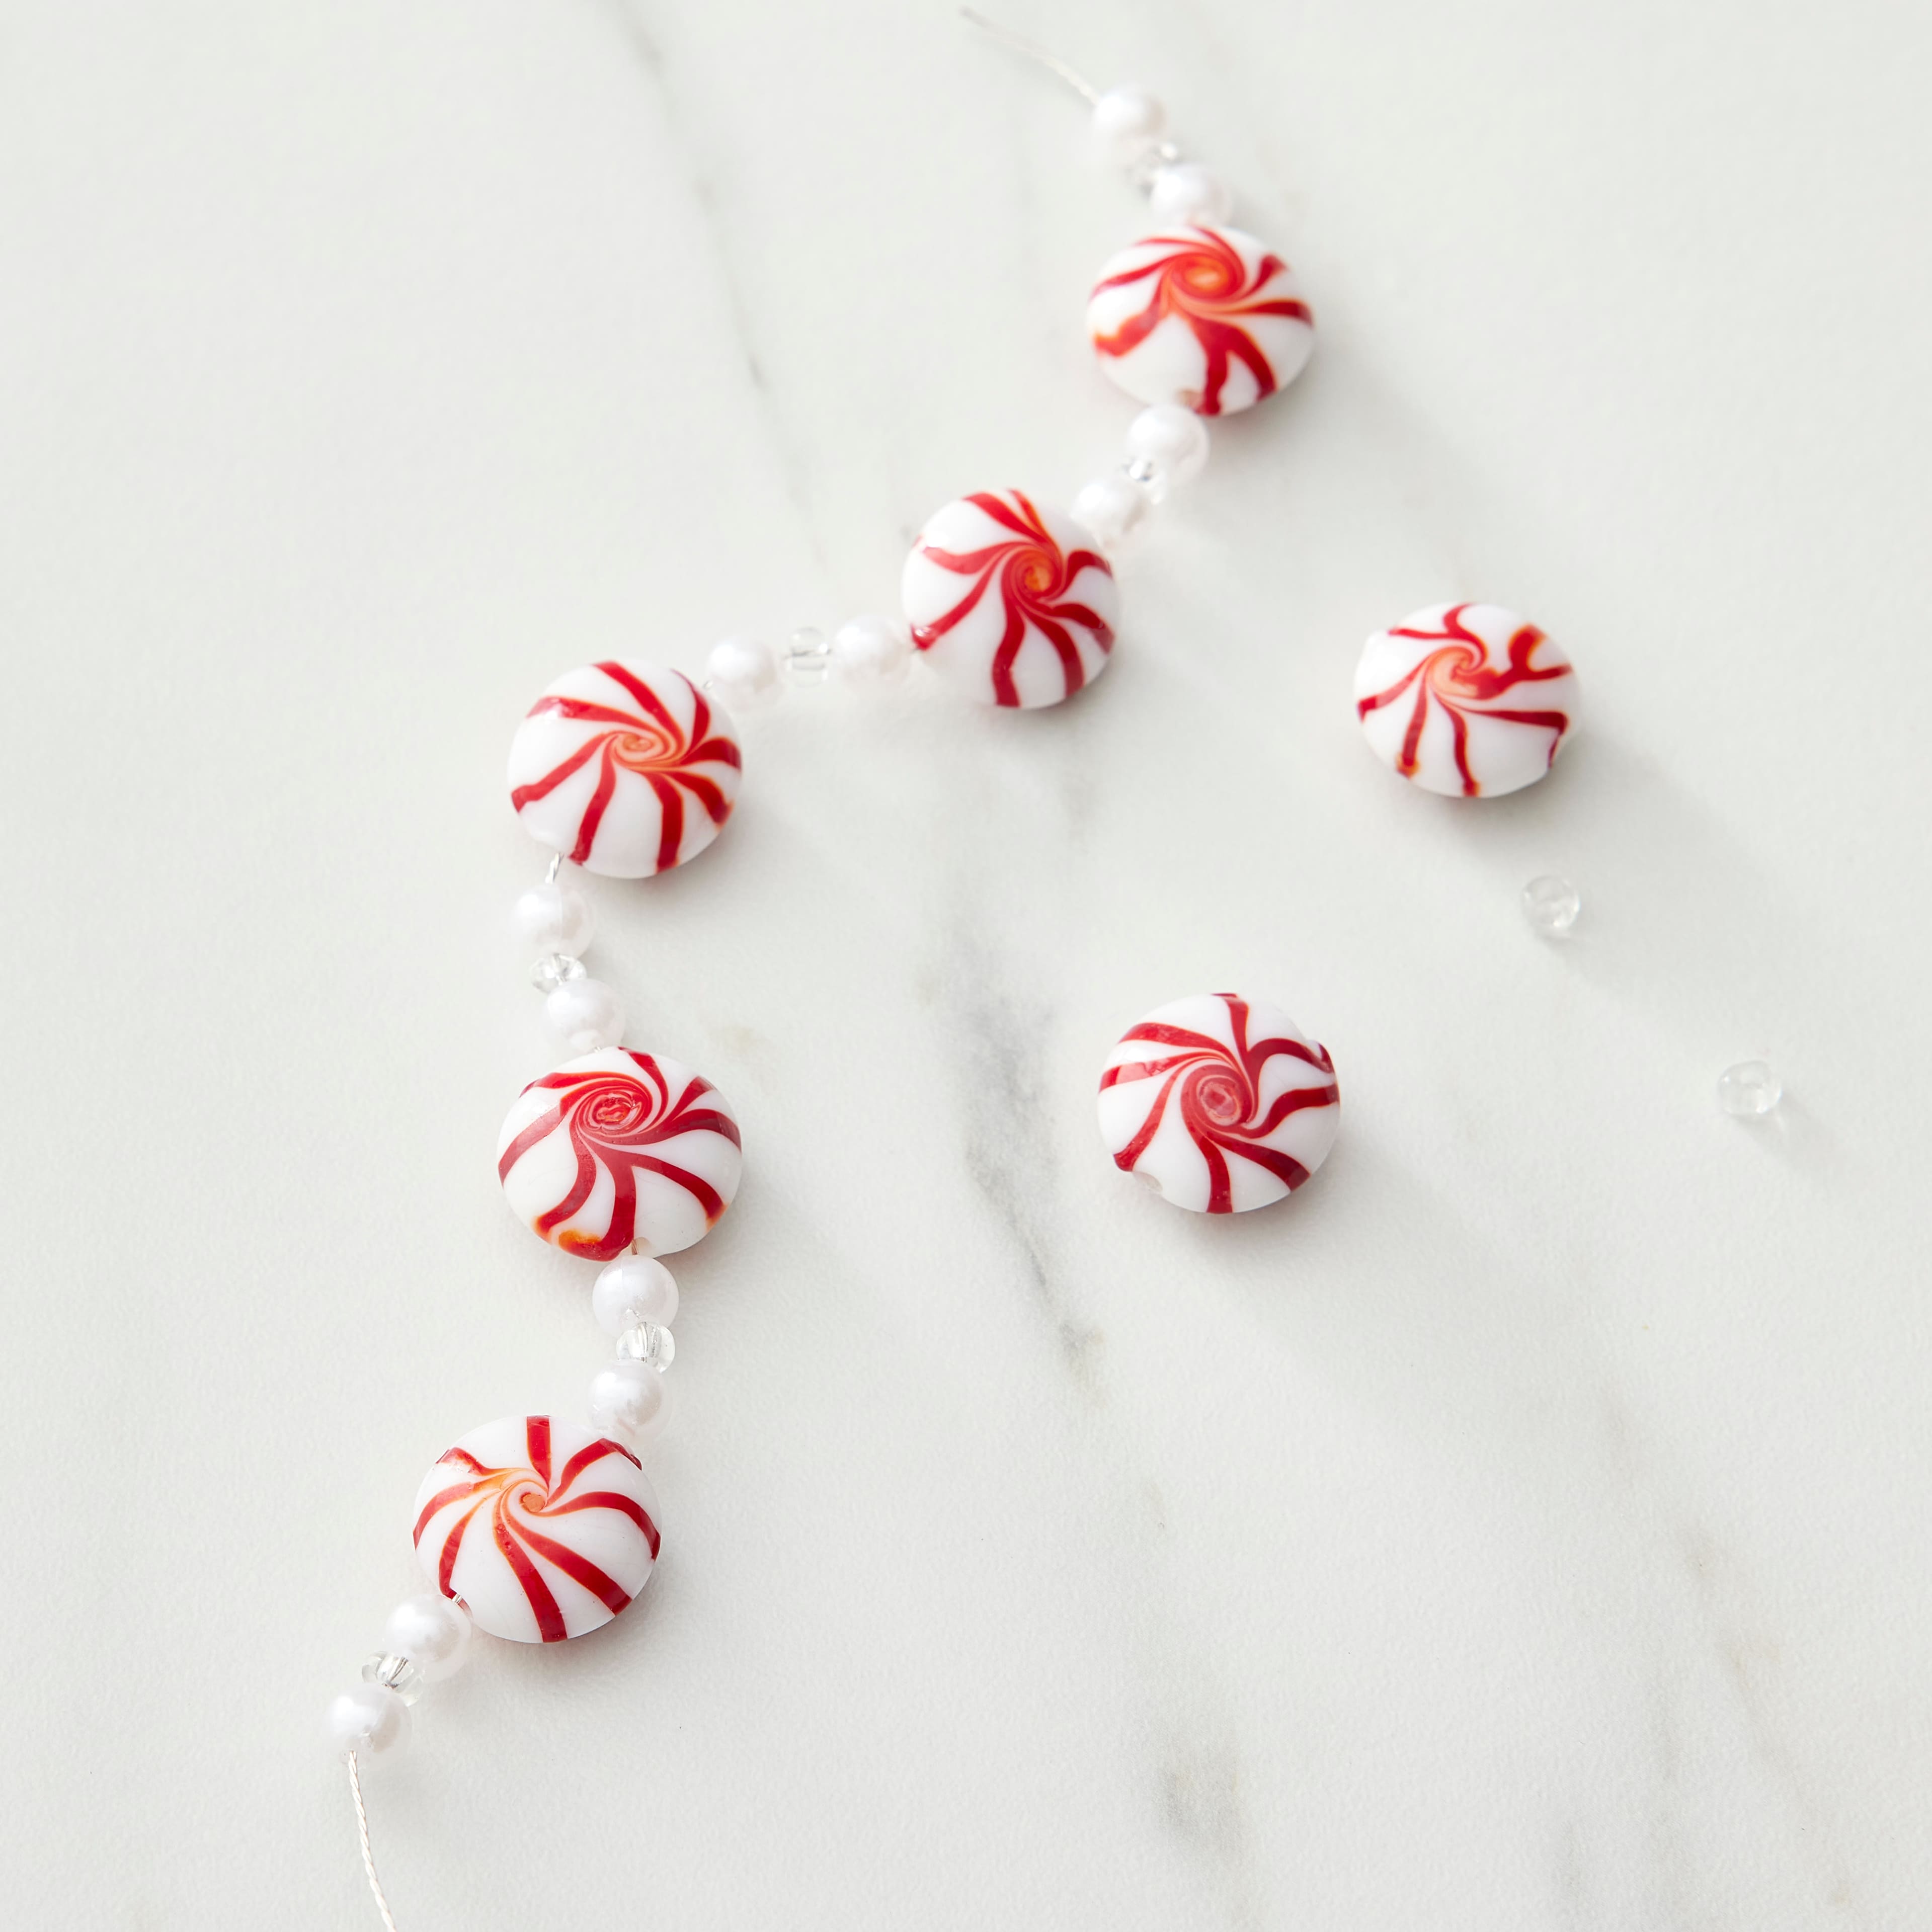 9 Packs: 7 ct. (63 total) Candy Cane Glass Beads, 16mm by Bead Landing&#x2122;